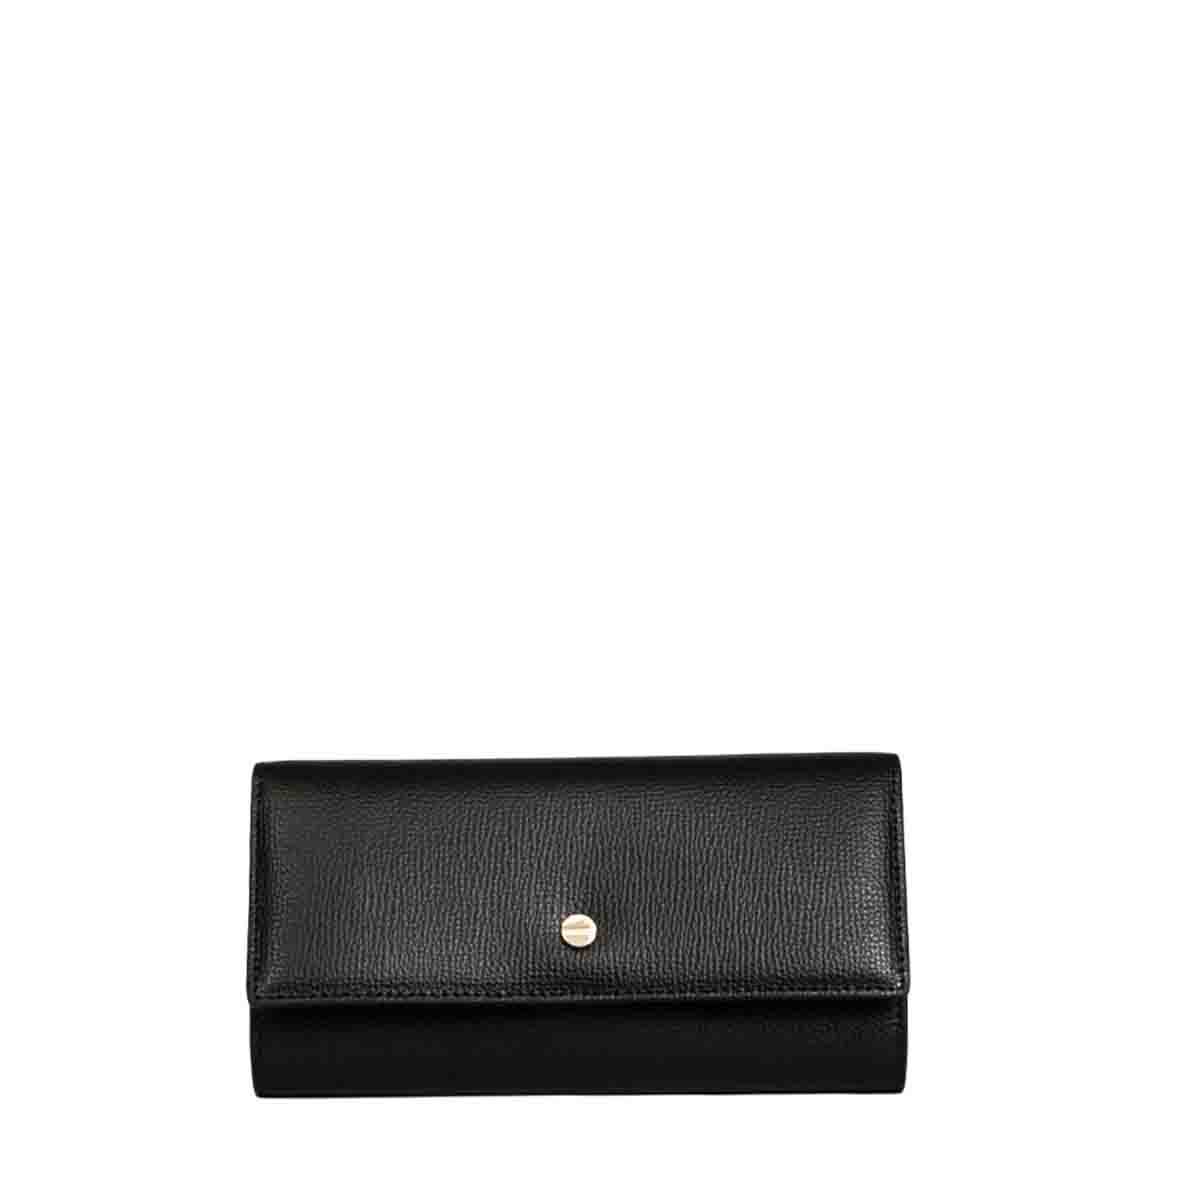 Borbonese Large Leather Wallet